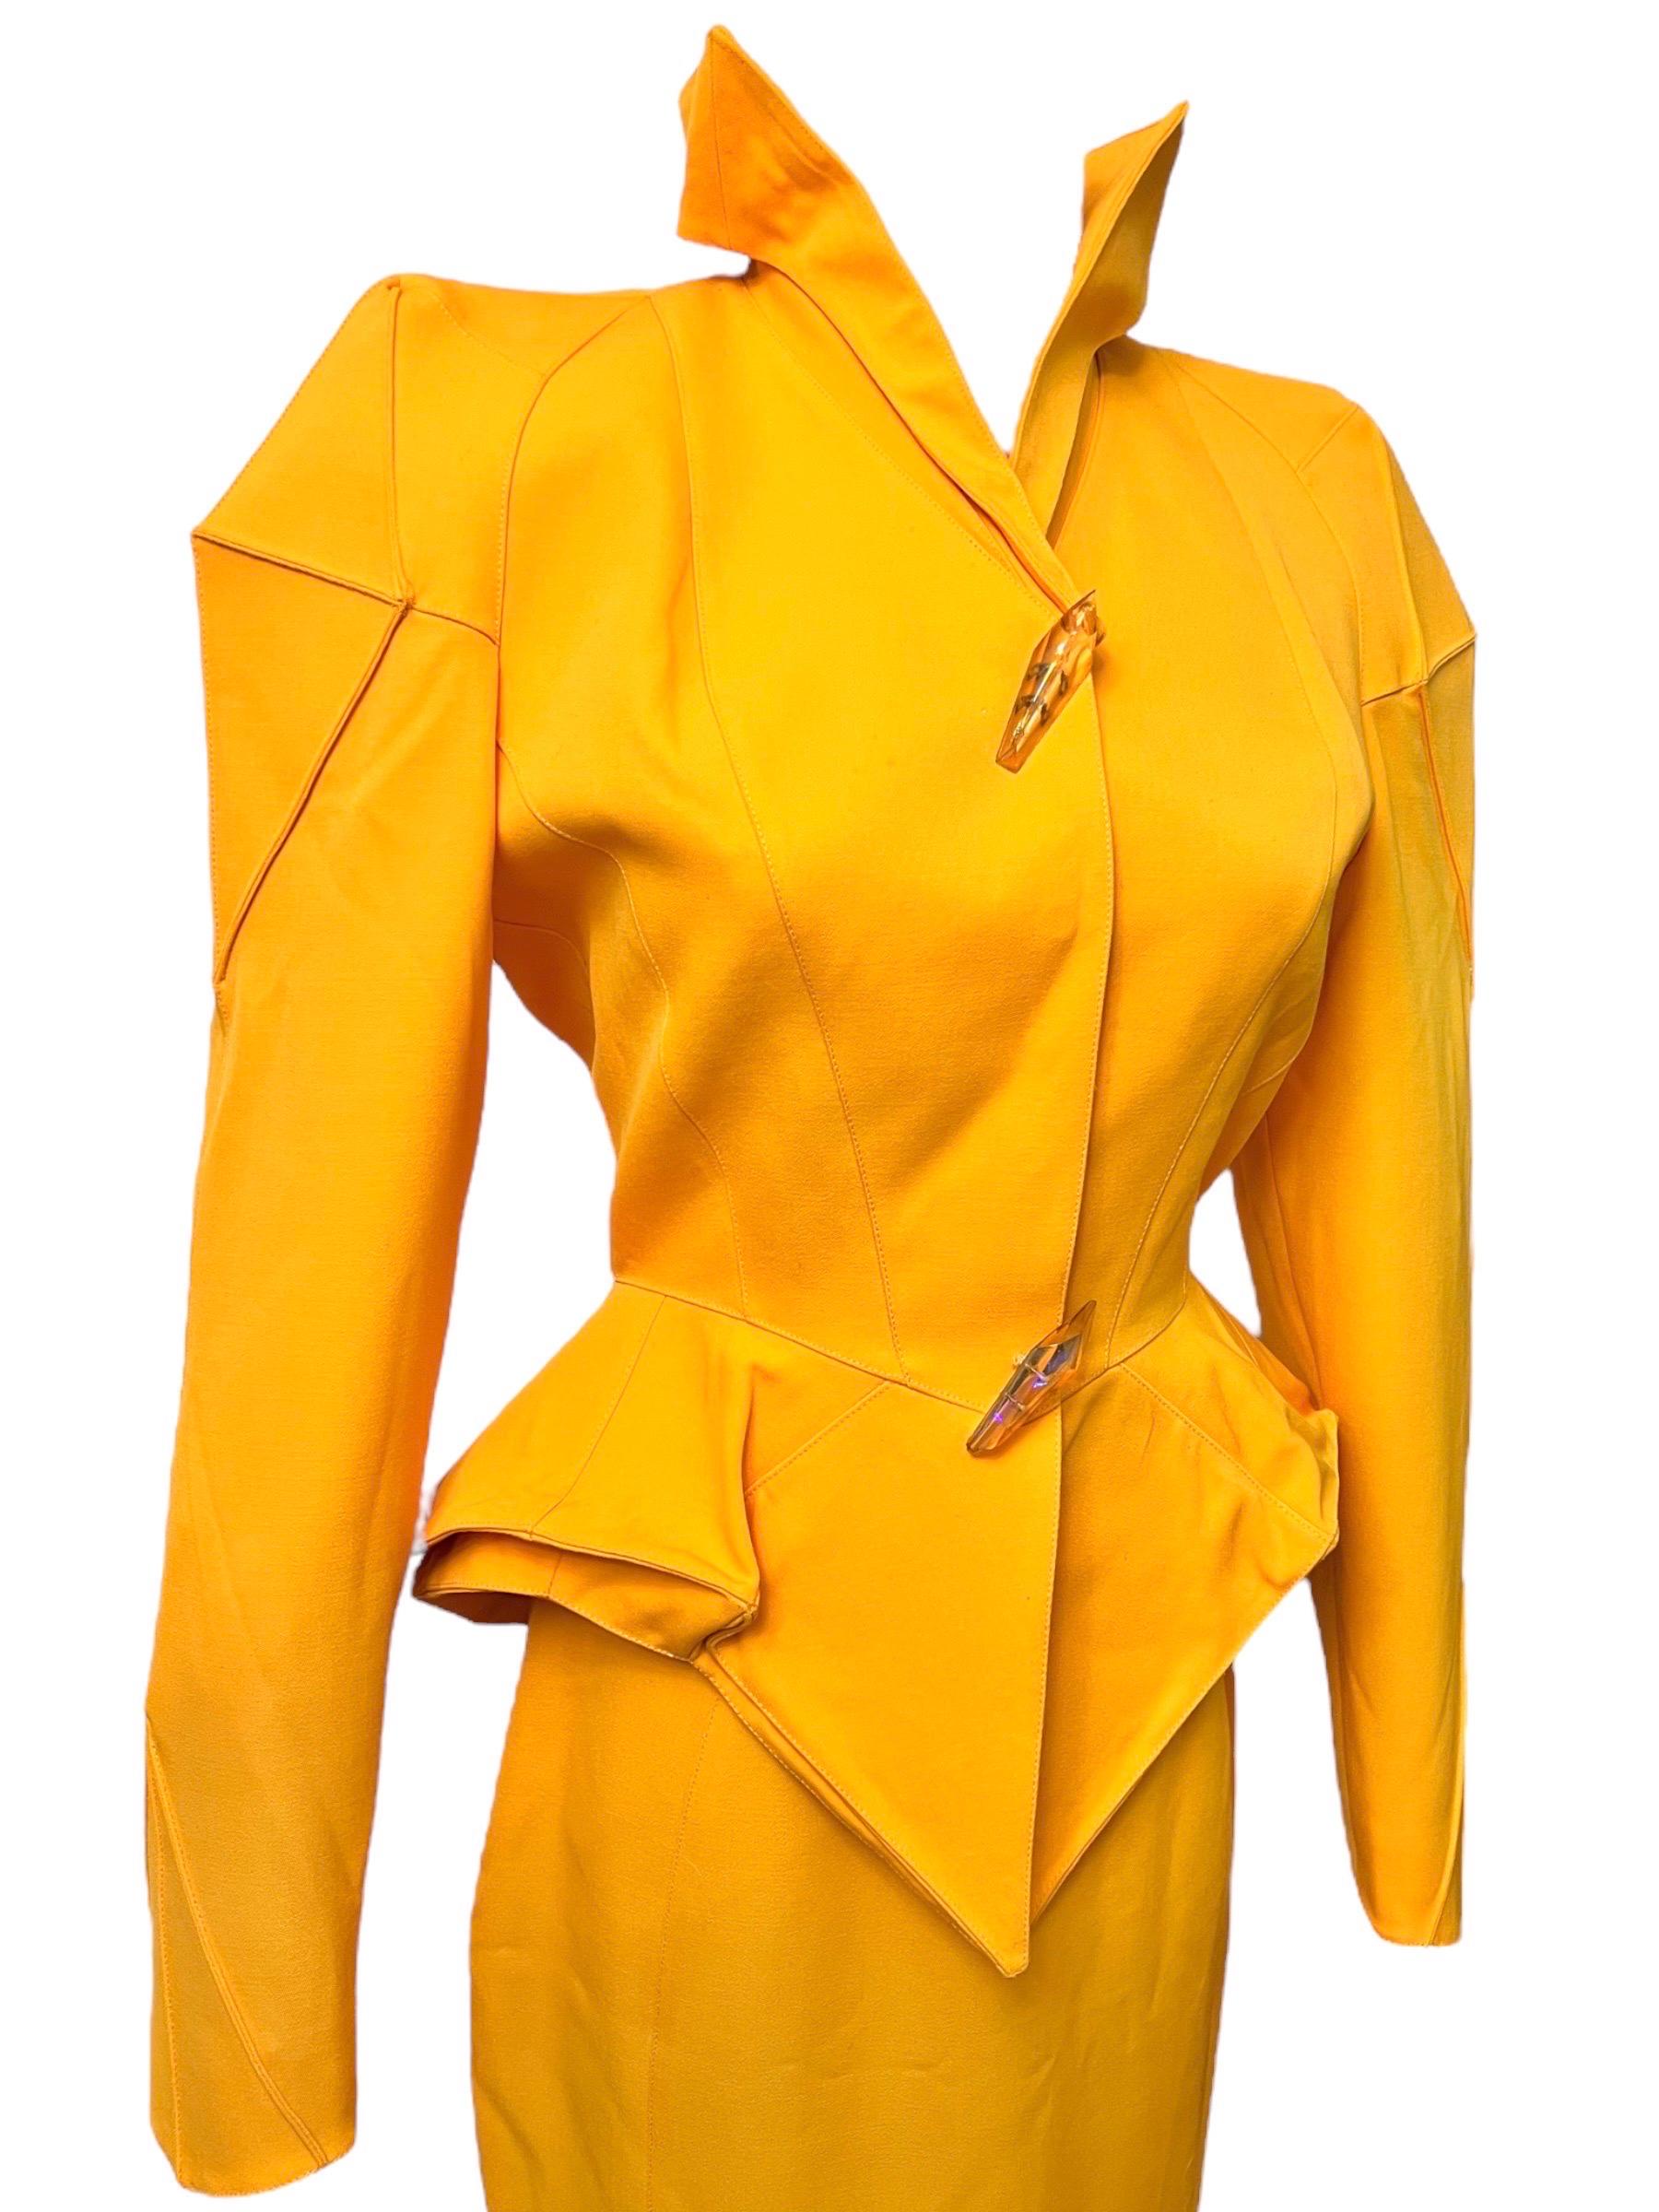 F/W 1991 Thierry Mugler Yellow Sculptural Skirt Suit For Sale 3